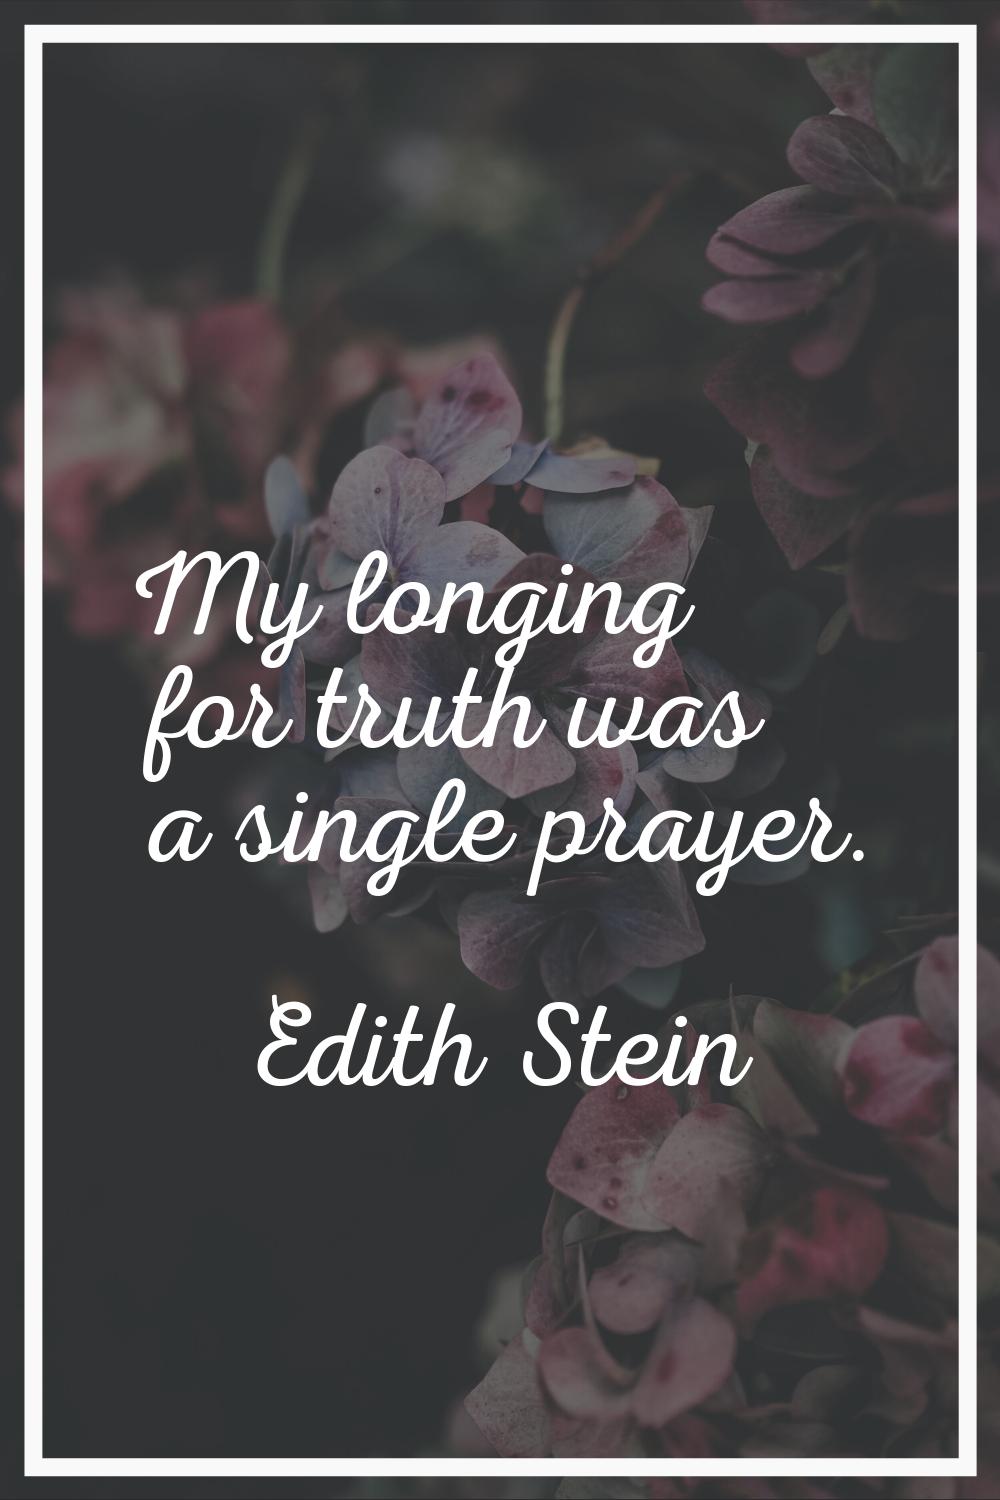 My longing for truth was a single prayer.